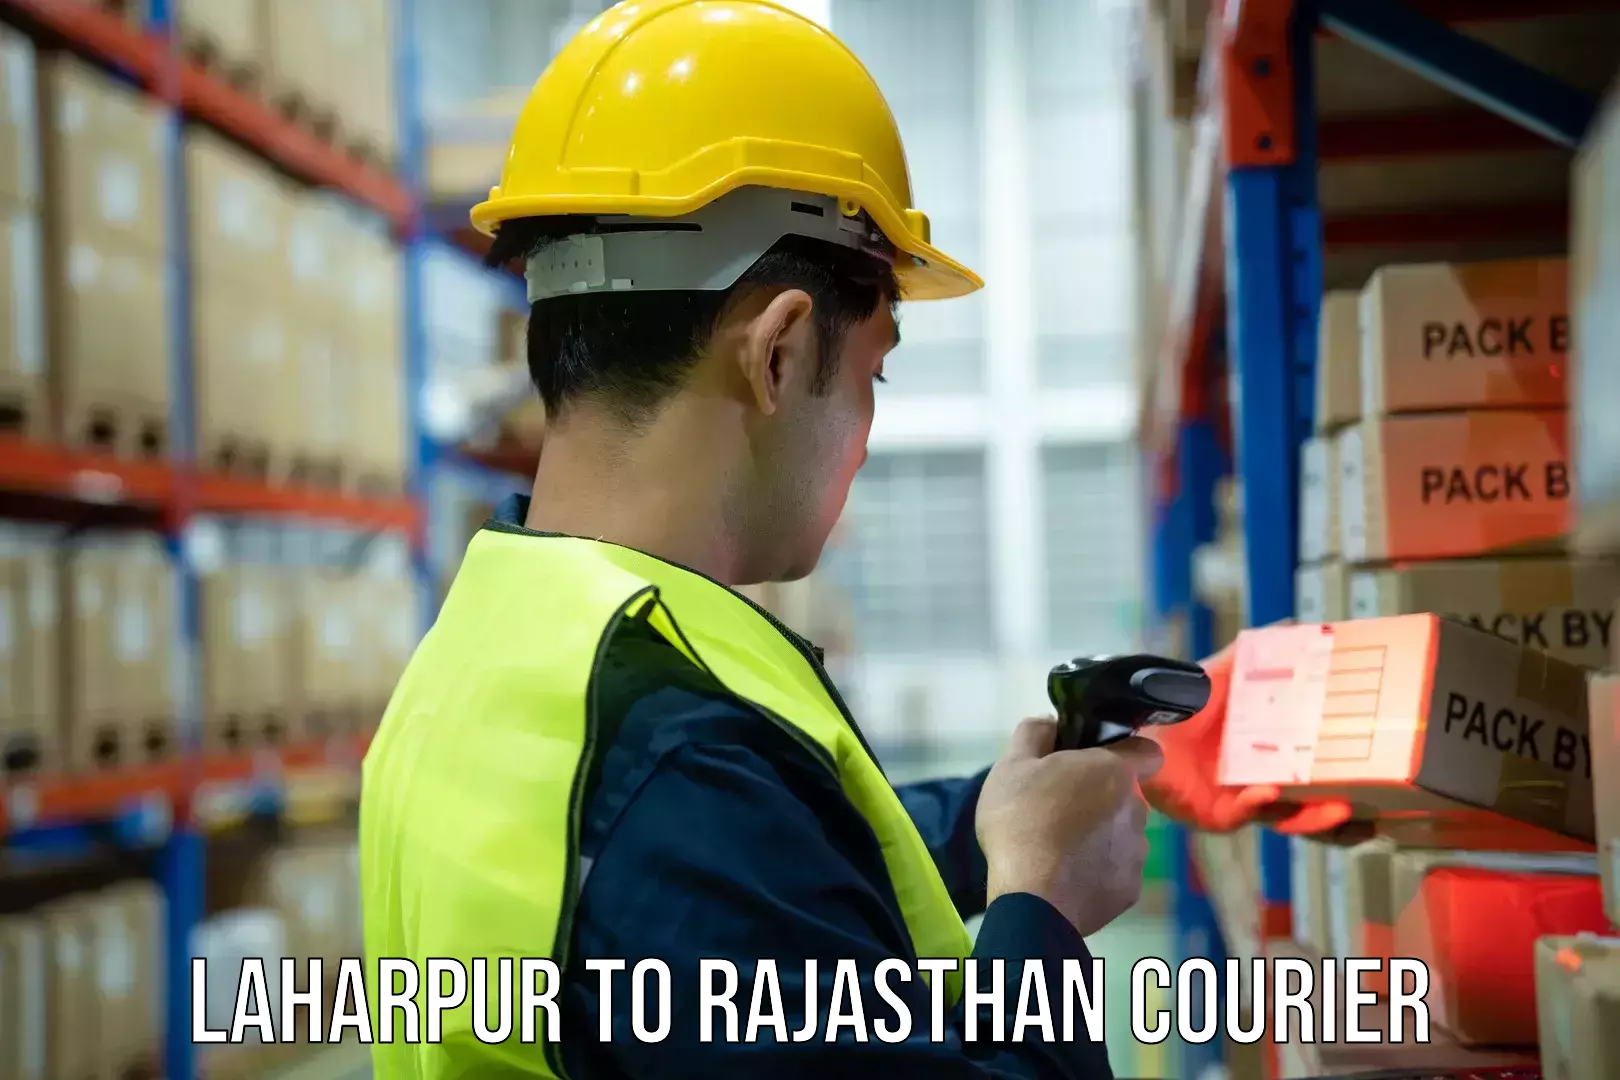 Package delivery network Laharpur to Rajasthan